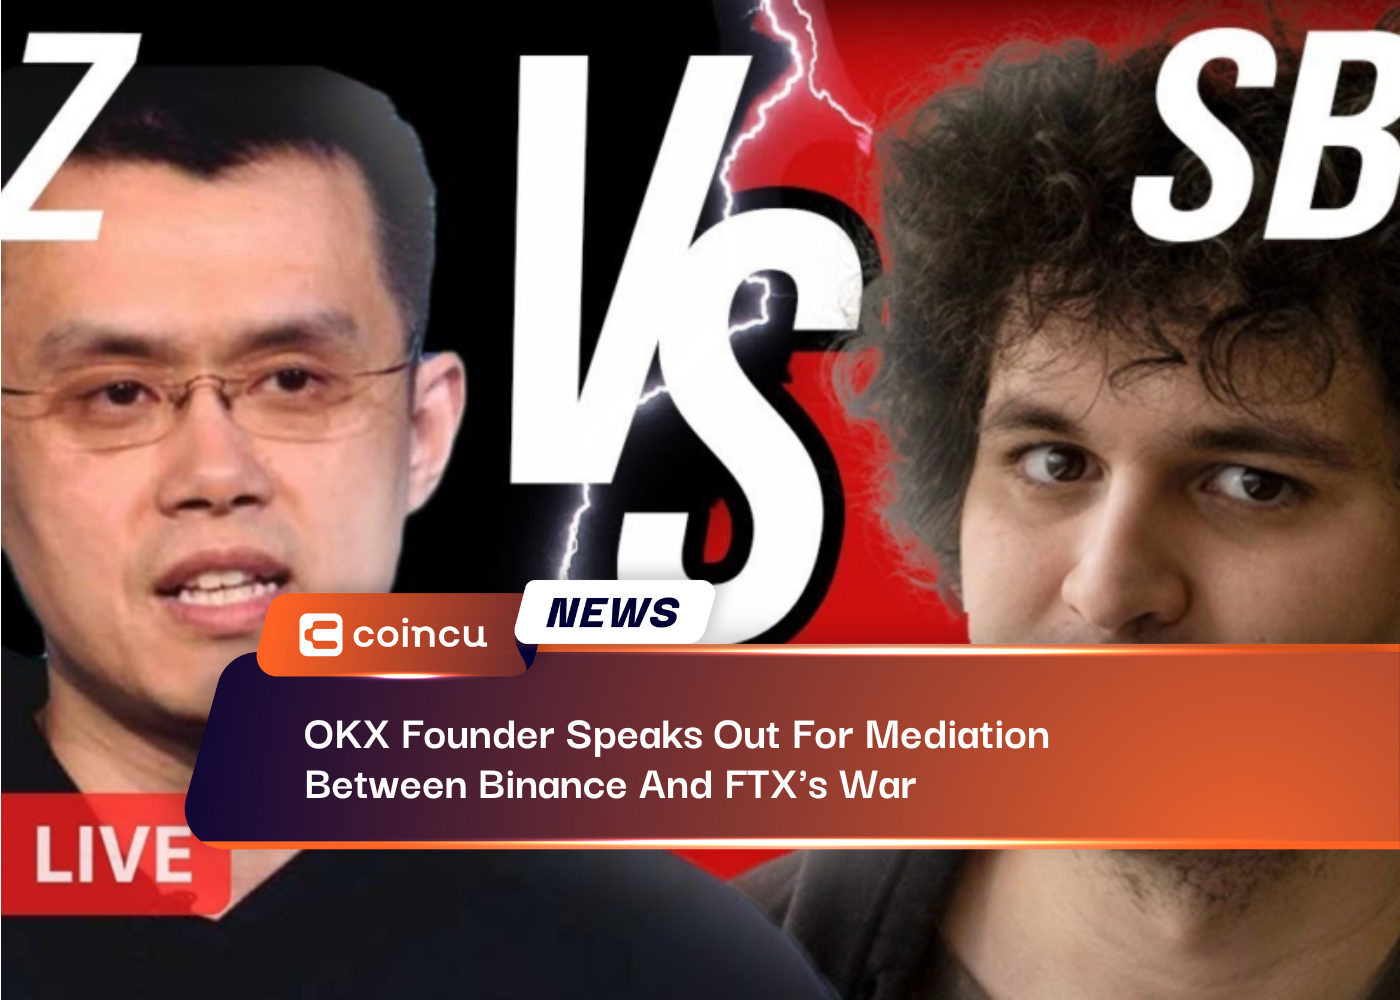 OKX Founder Speaks Out For Mediation Between Binance And FTX's War